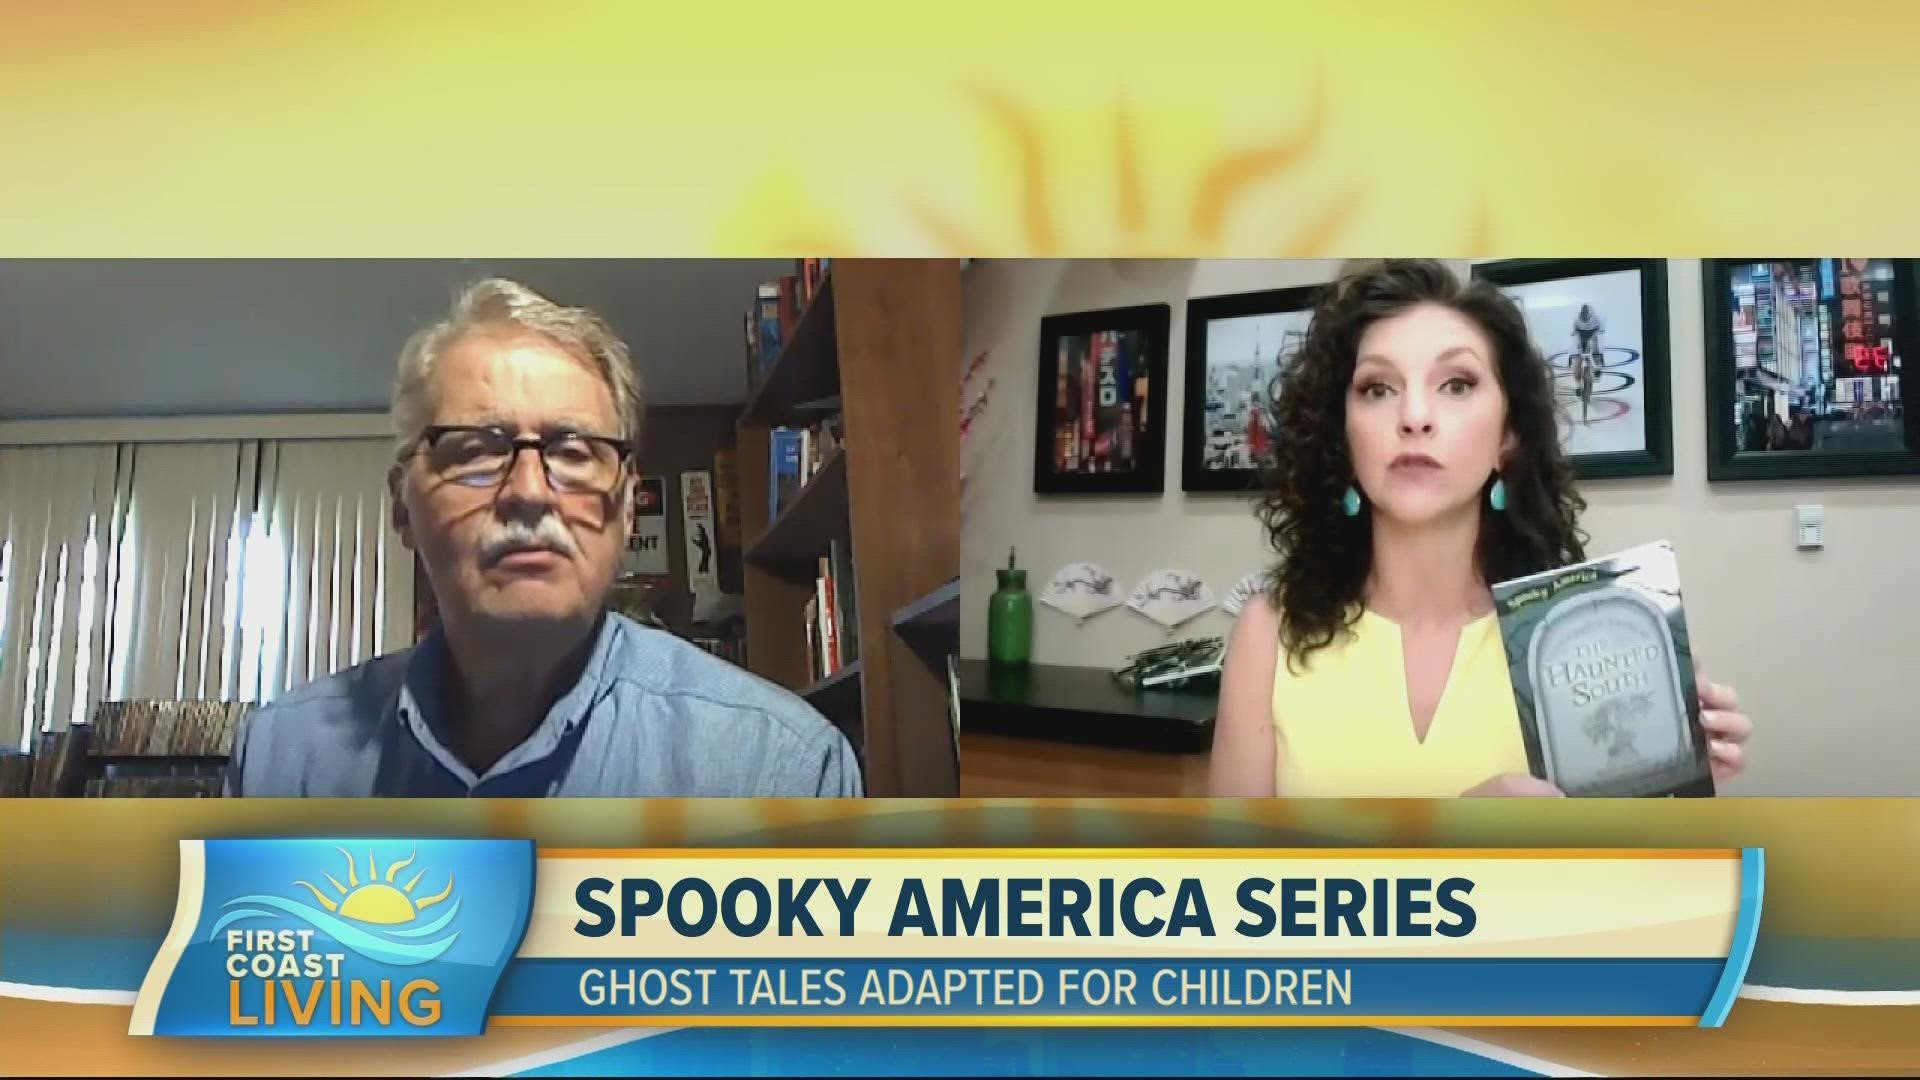 Halloween is almost here. Looking for books your kids? Ghost tales for children is here.